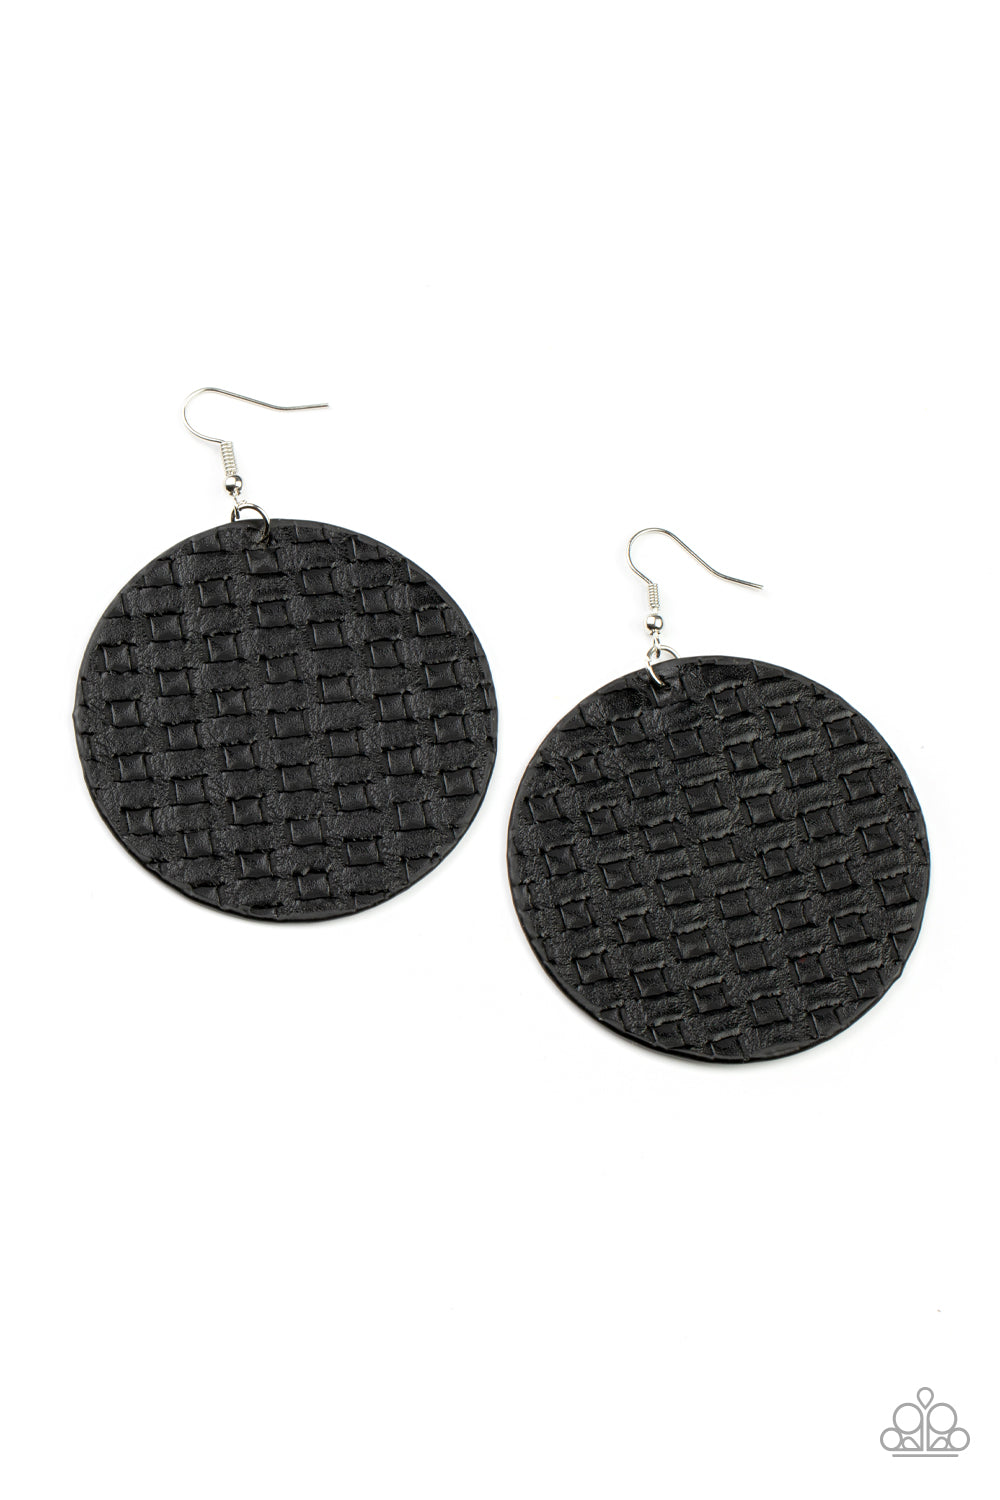 WEAVE Me Out Of It Black Earring - Paparazzi Accessories  Featuring a faux woven pattern a leathery black frame swings from the ear for an earthy artisan fashion. Earring attaches to a standard fishhook fitting.  Sold as one pair of earrings.